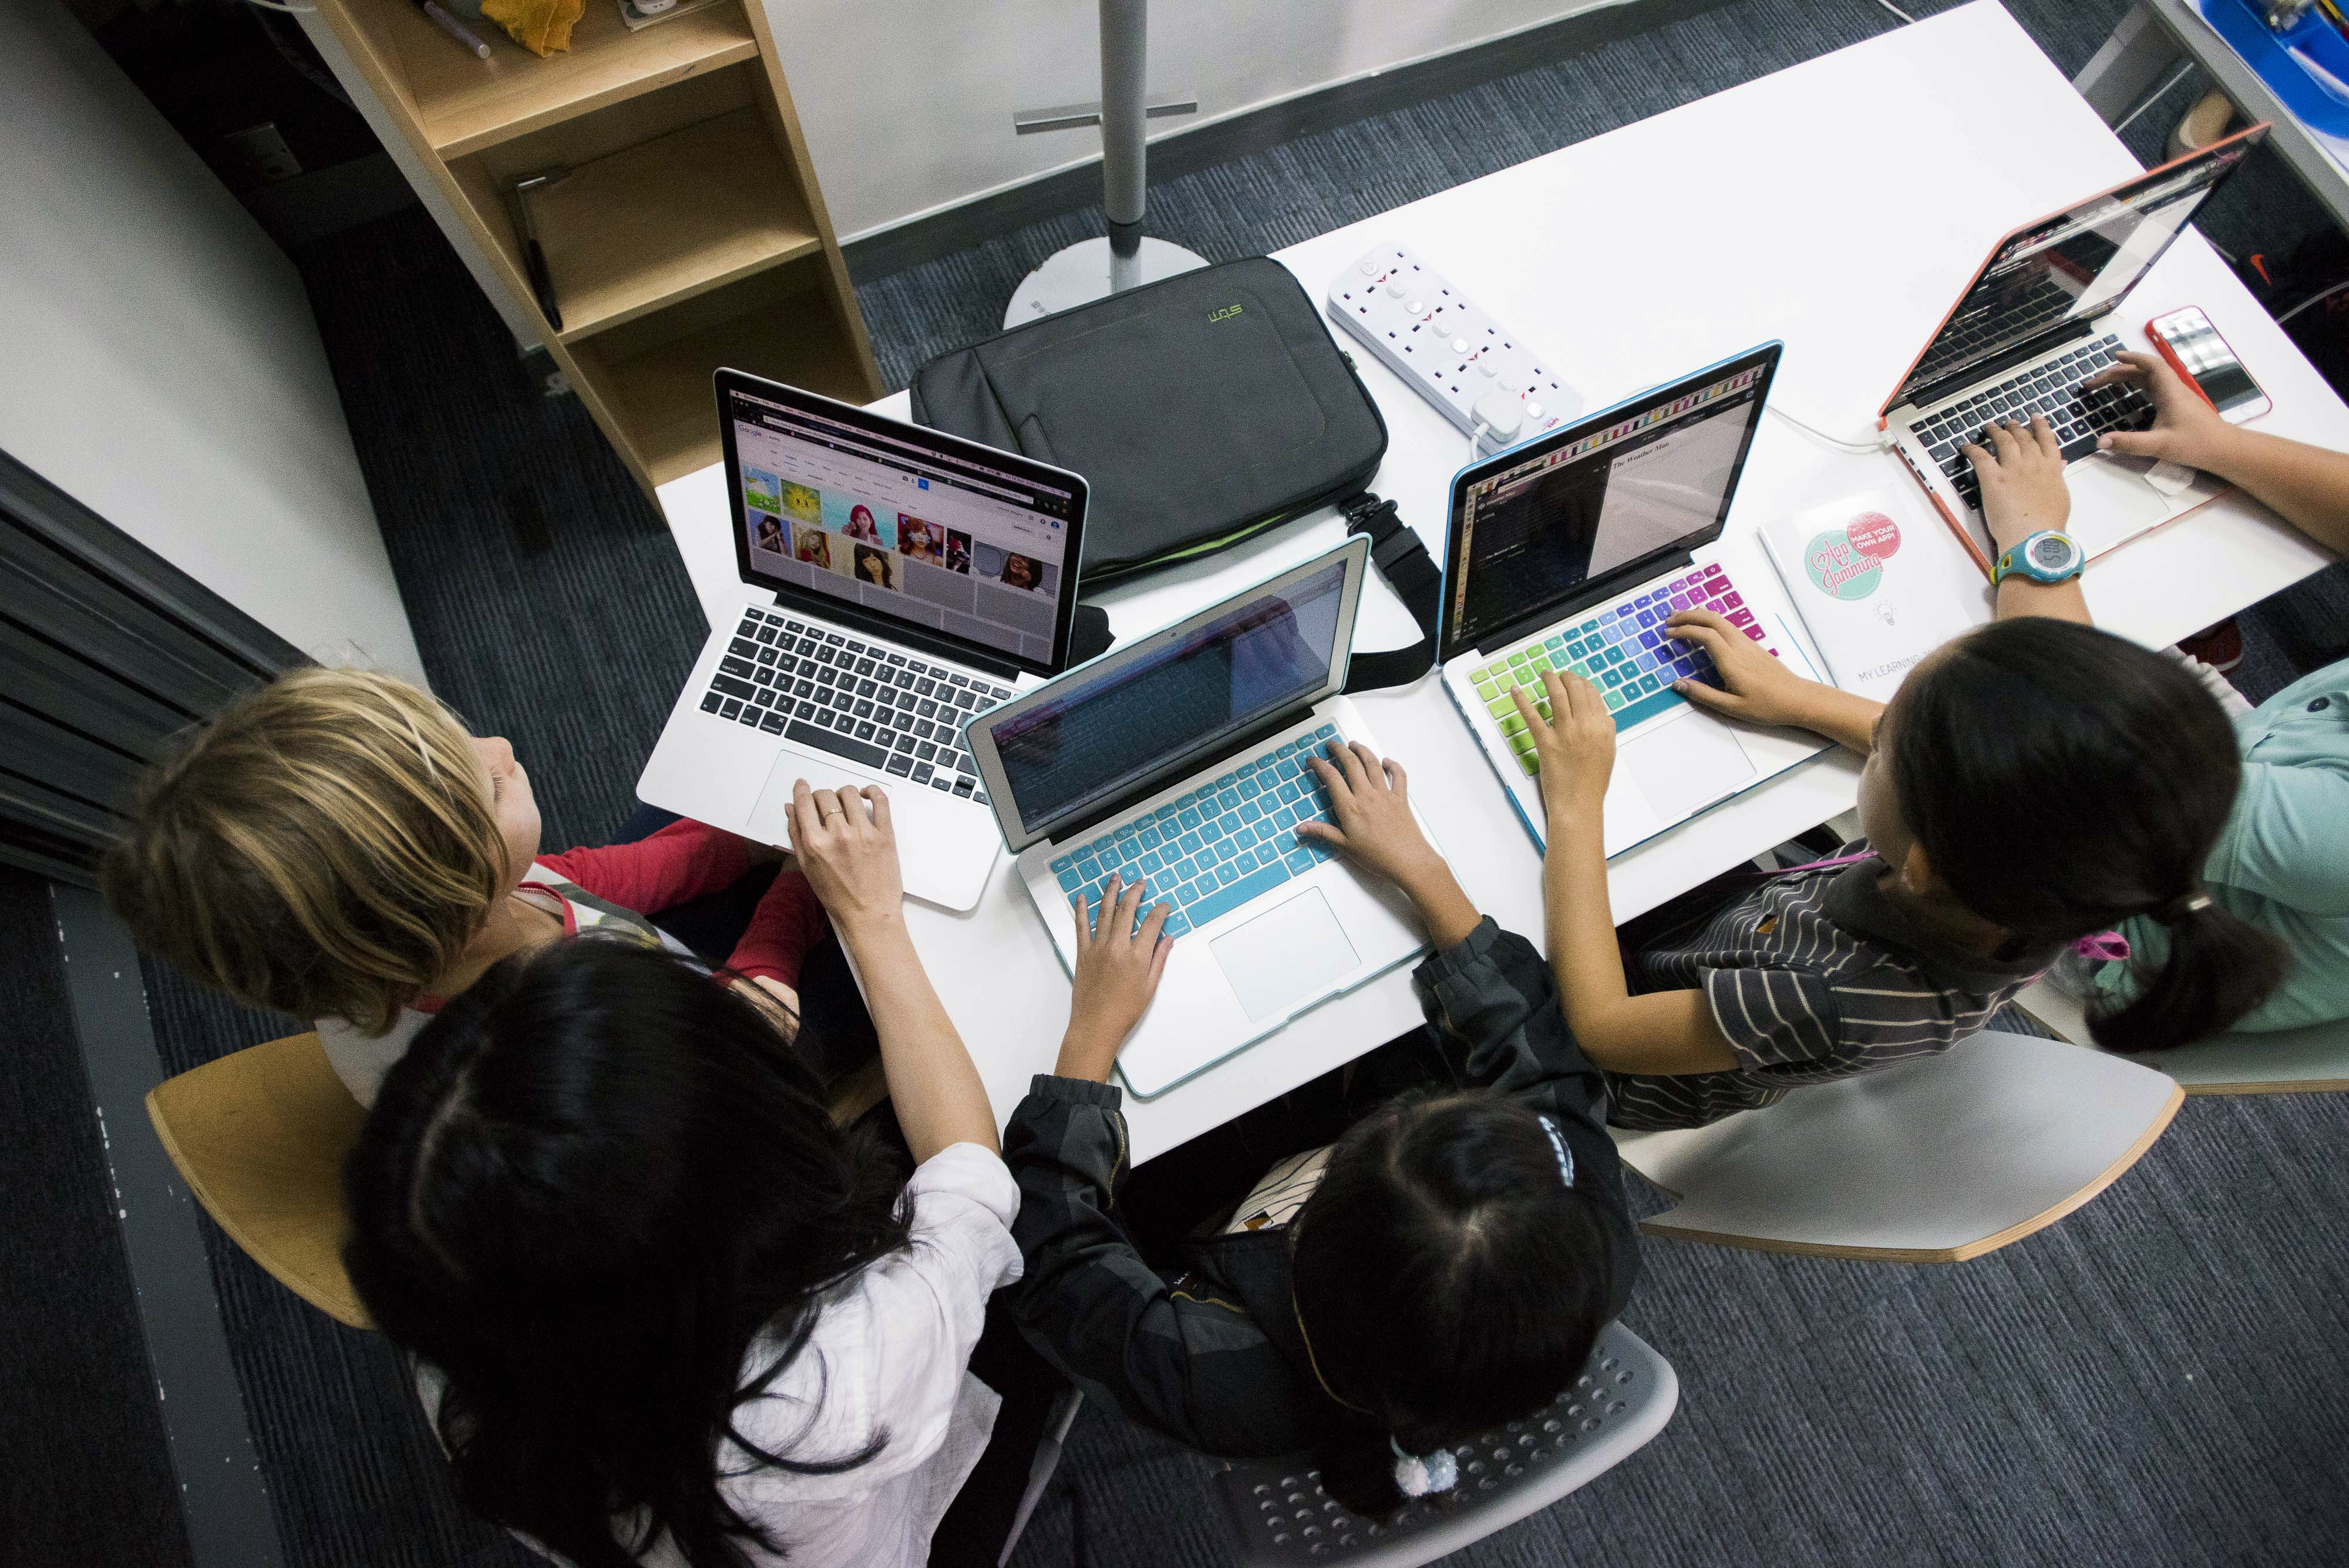 Students type on Apple Inc. laptop computers during a coding class at the First Code Academy in Hong Kong, China, on Friday, Nov. 13, 2015. About 2,500 students have taken courses at the First Code Academy. (Bloomberg—Bloomberg via Getty Images)